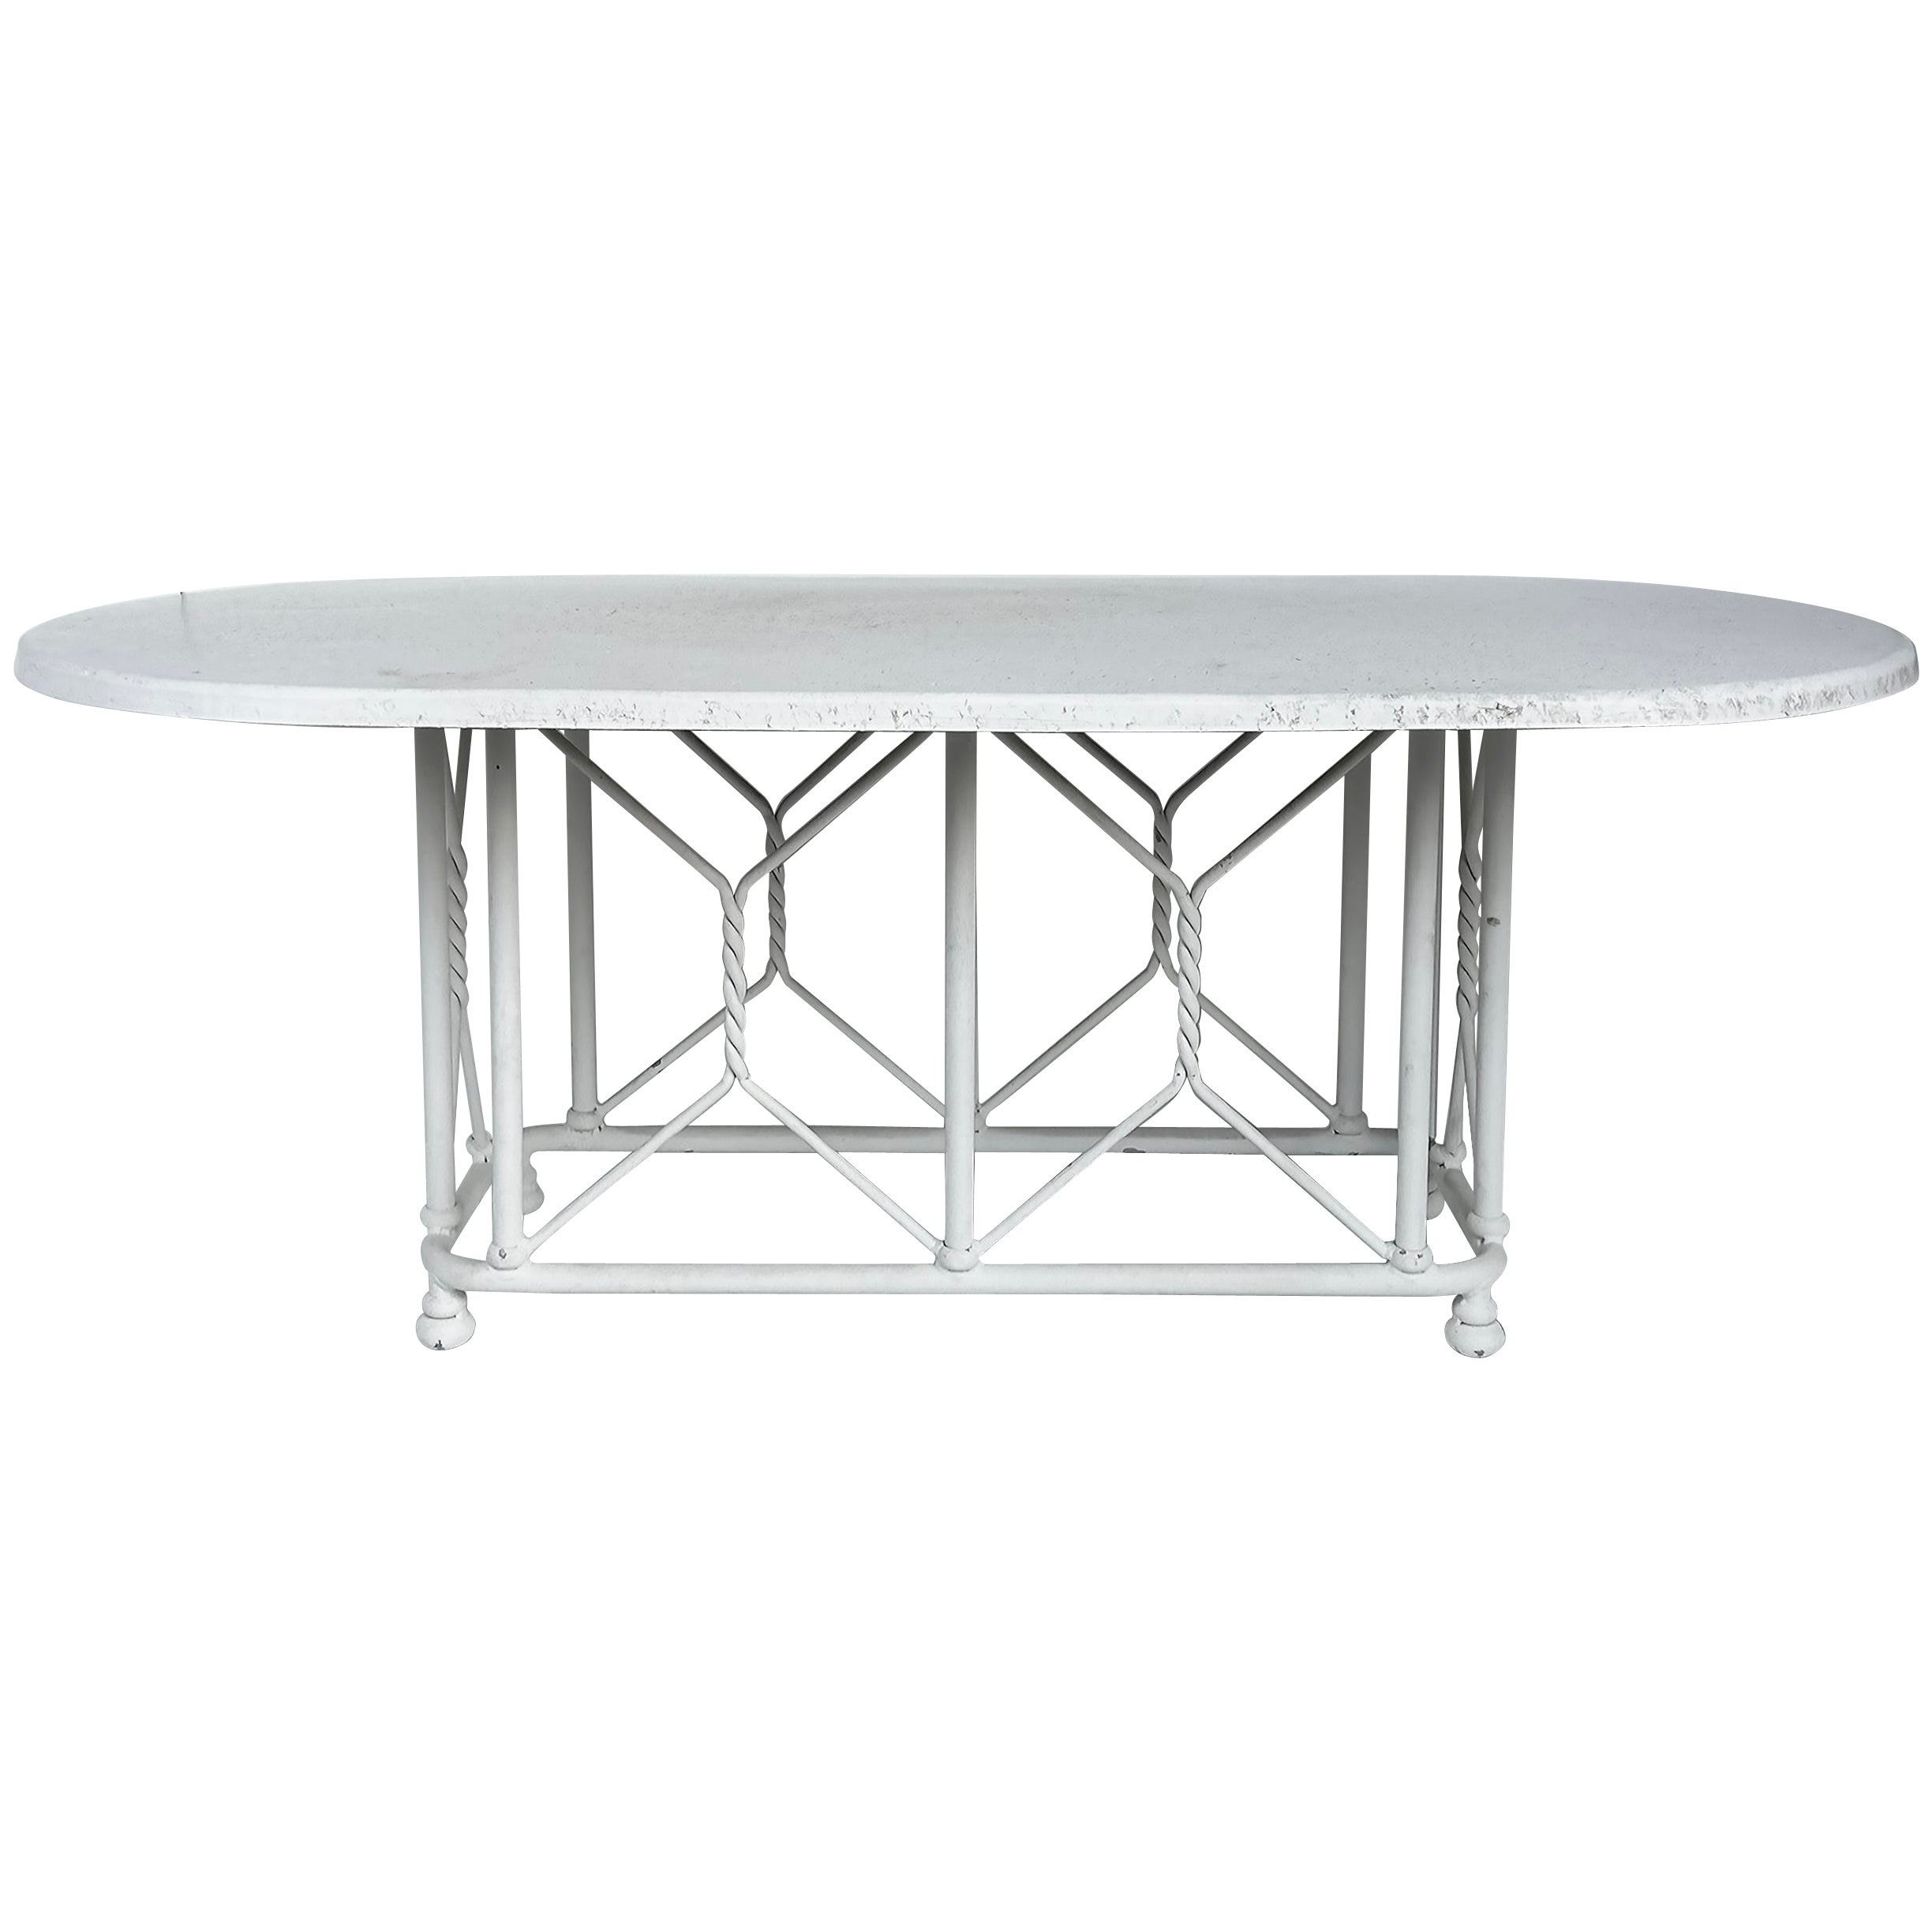 Aluminum and Fiberglass Garden or Patio Dining Table, Oval Racetrack  For Sale